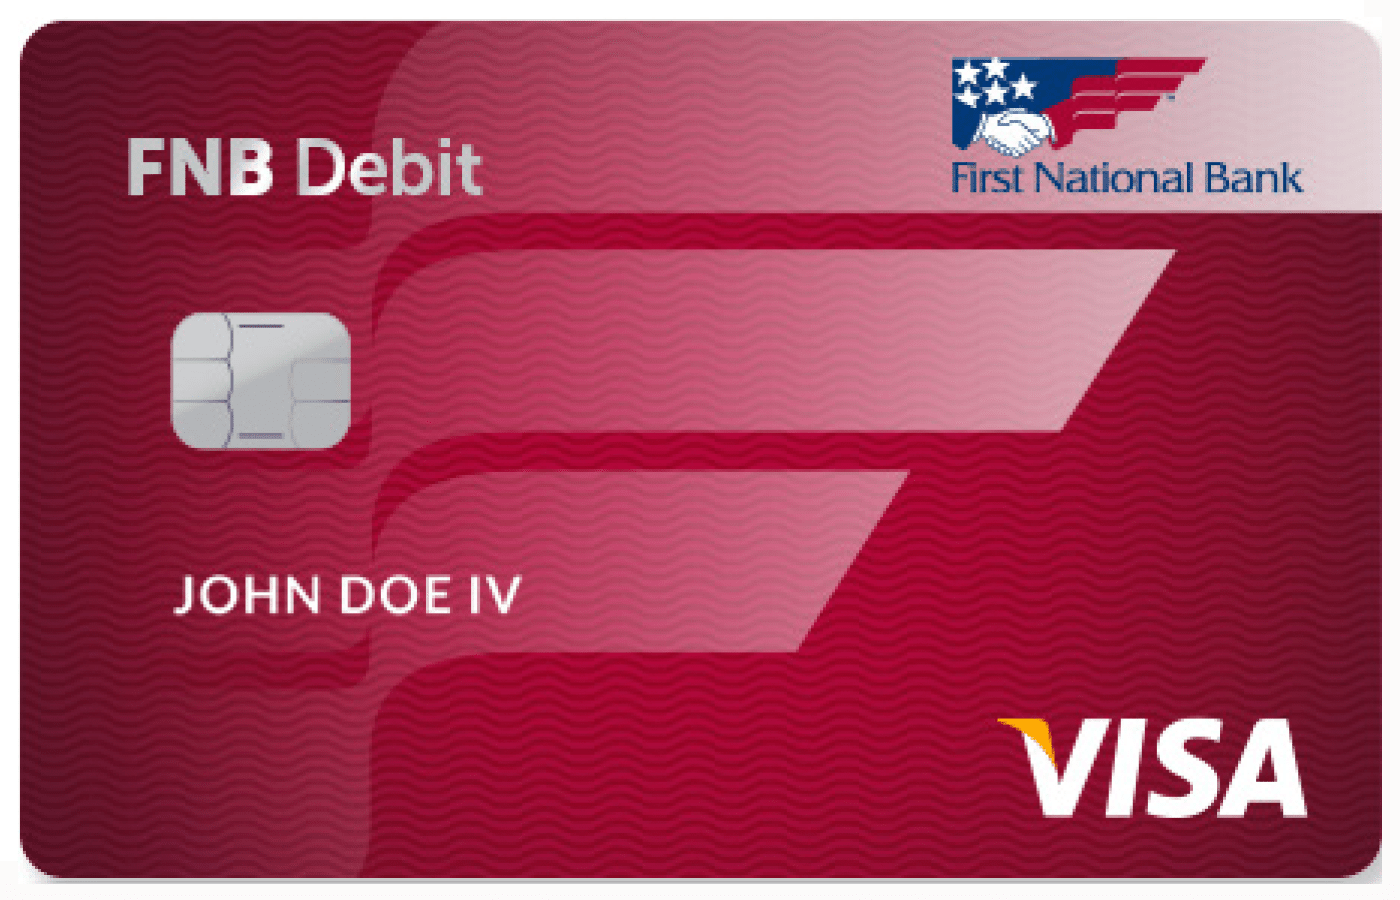 1st financial credit card